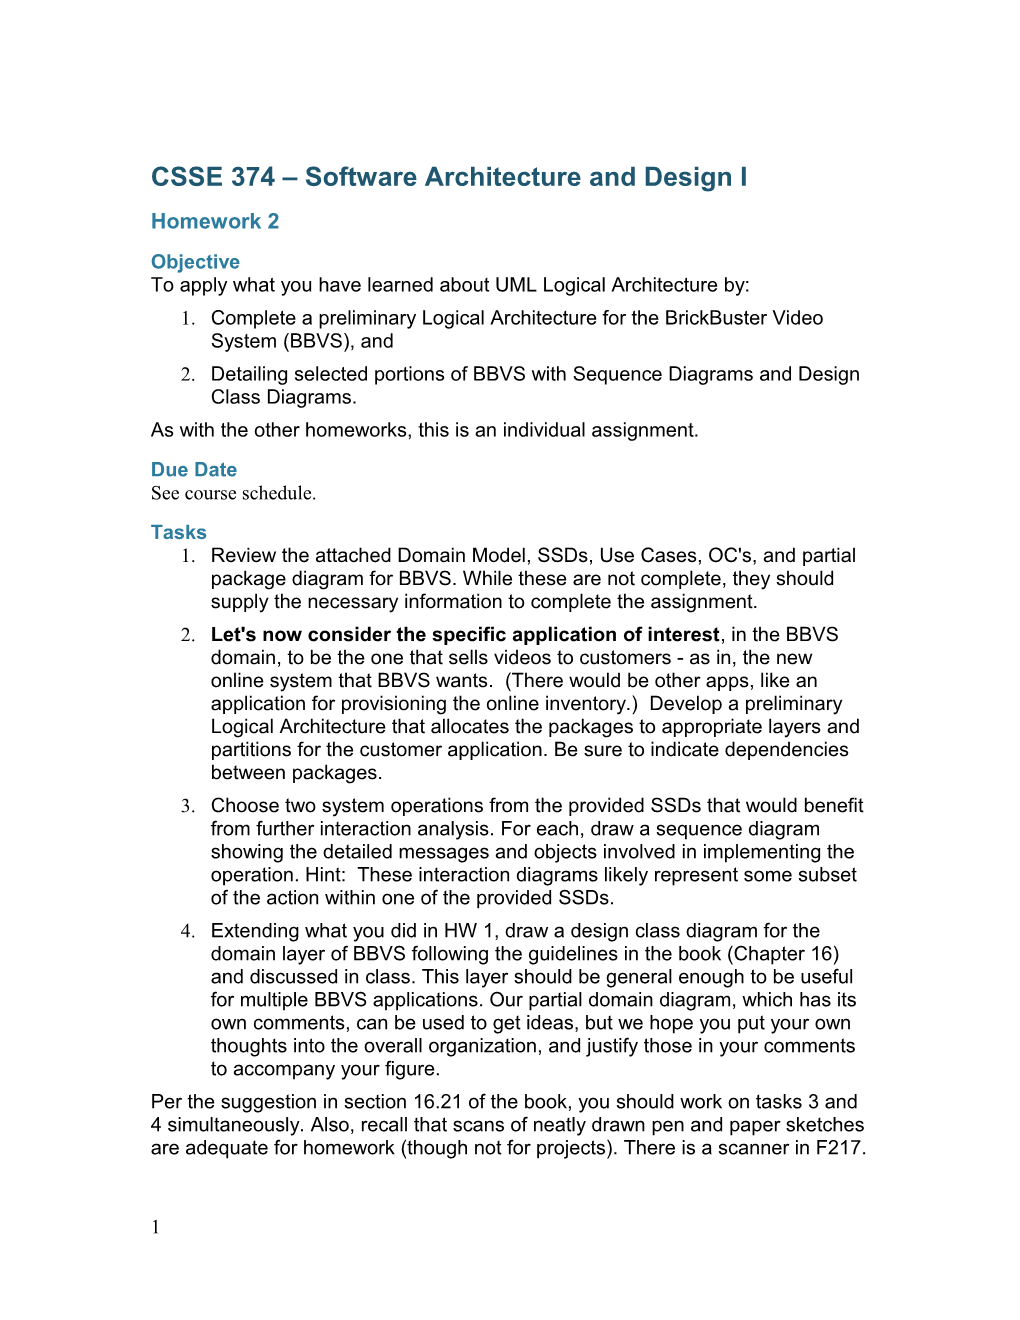 CSSE 374 Software Architecture and Design I